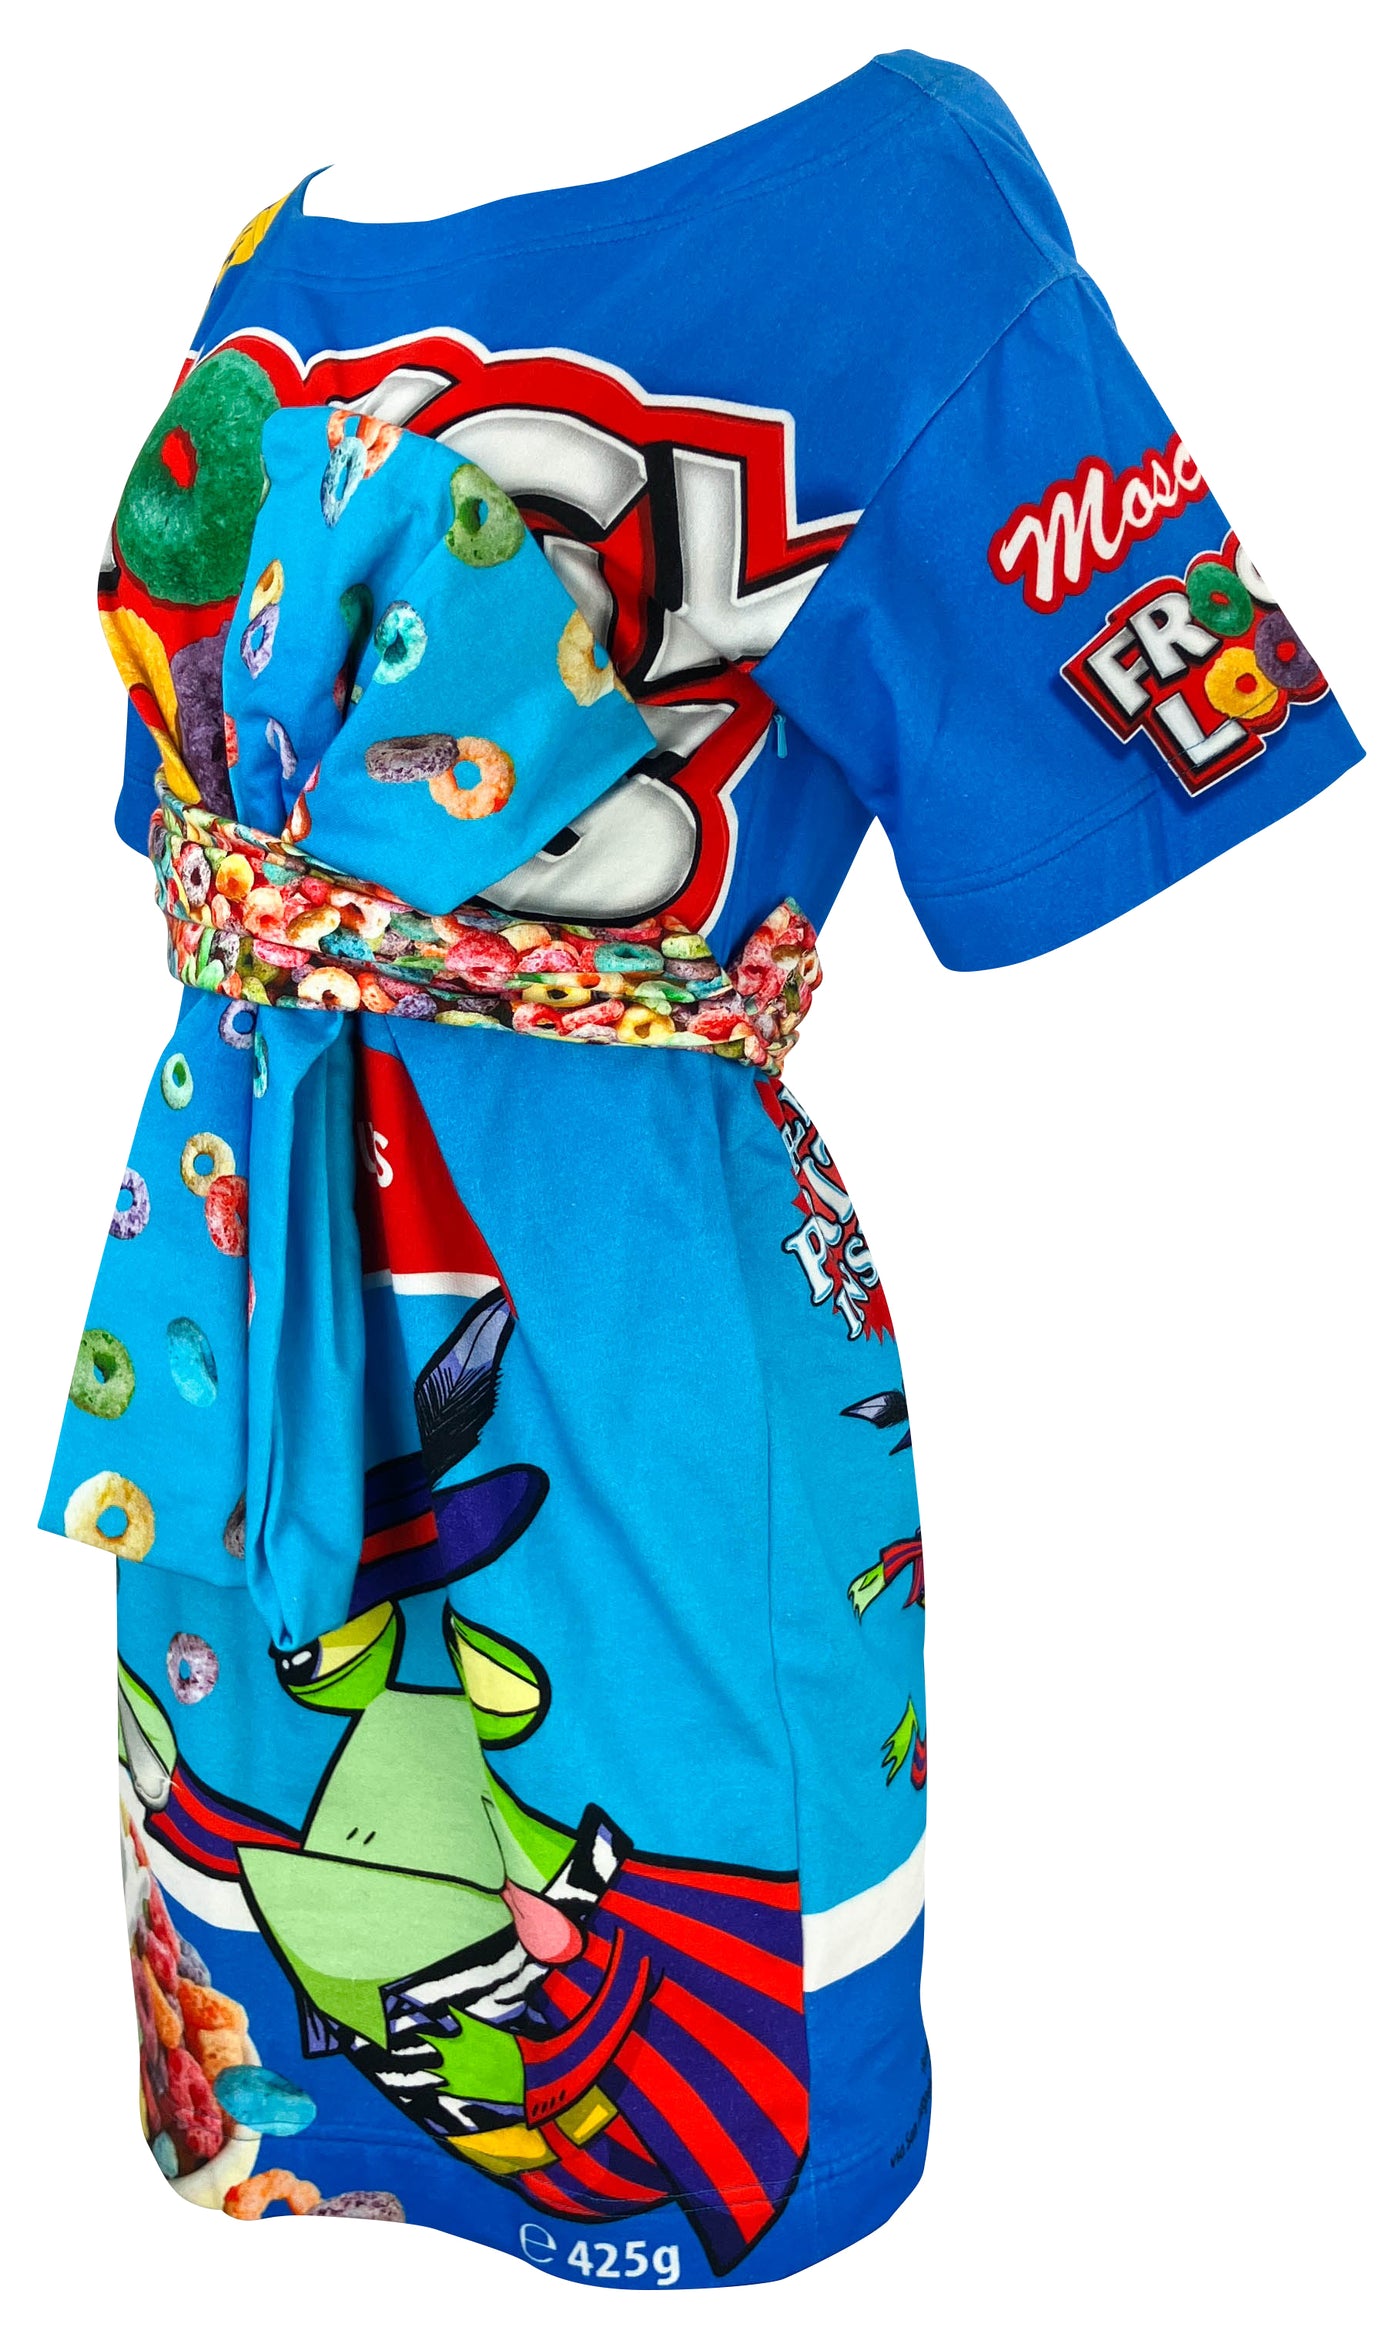 Moschino Froggy Loops Dress in Blue Multi - Discounts on Moschino at UAL